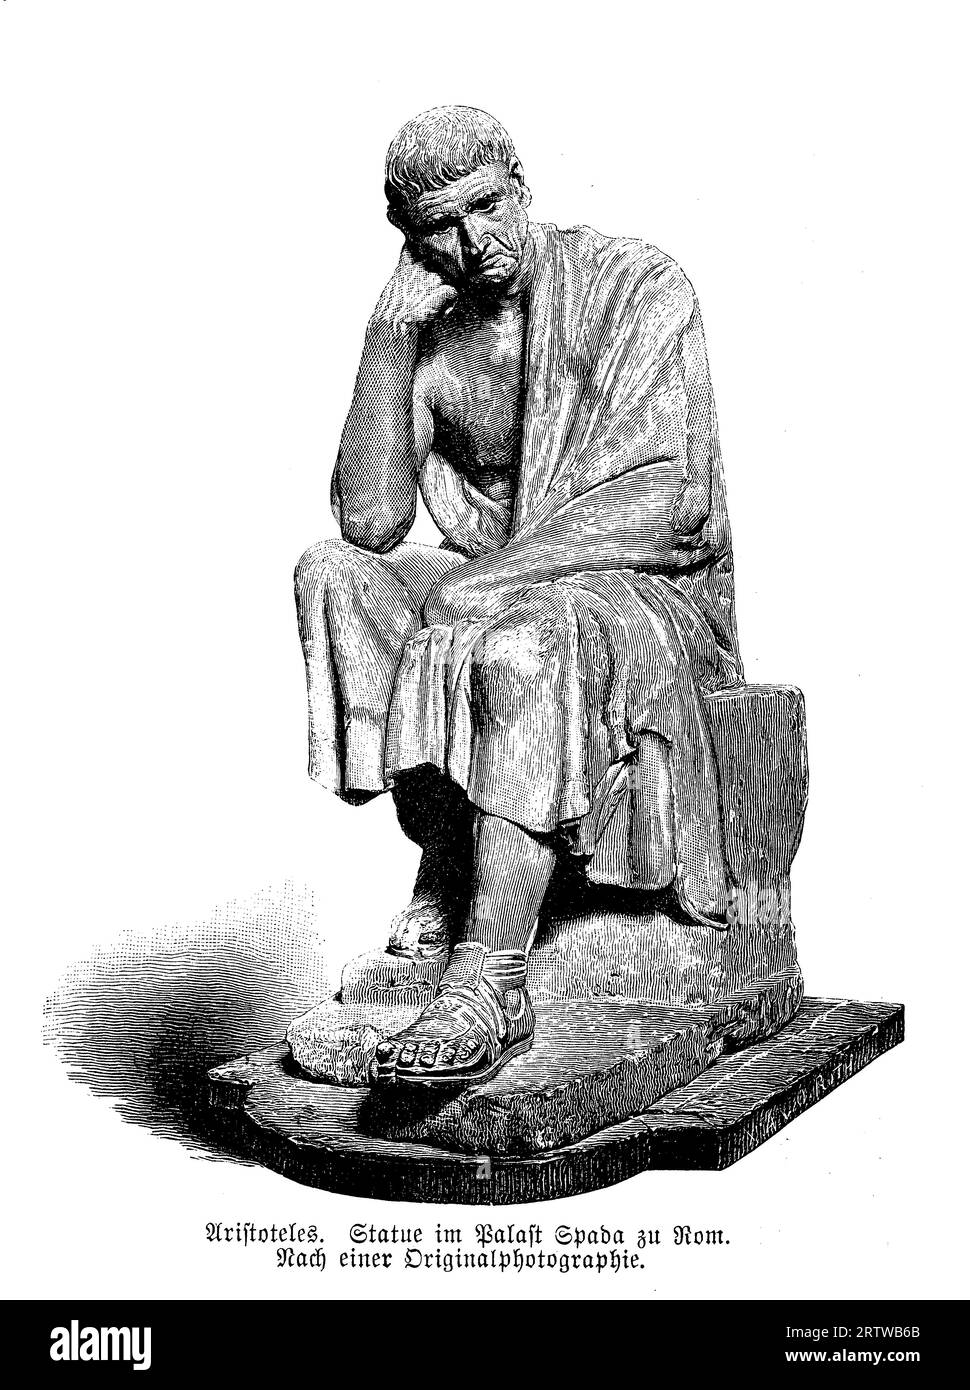 Aristotle (384-322 BCE) ancient Greek philosopher, scientist, and polymath who made significant contributions to various fields of knowledge. He was a student of Plato and later became the tutor of Alexander the Great Stock Photo